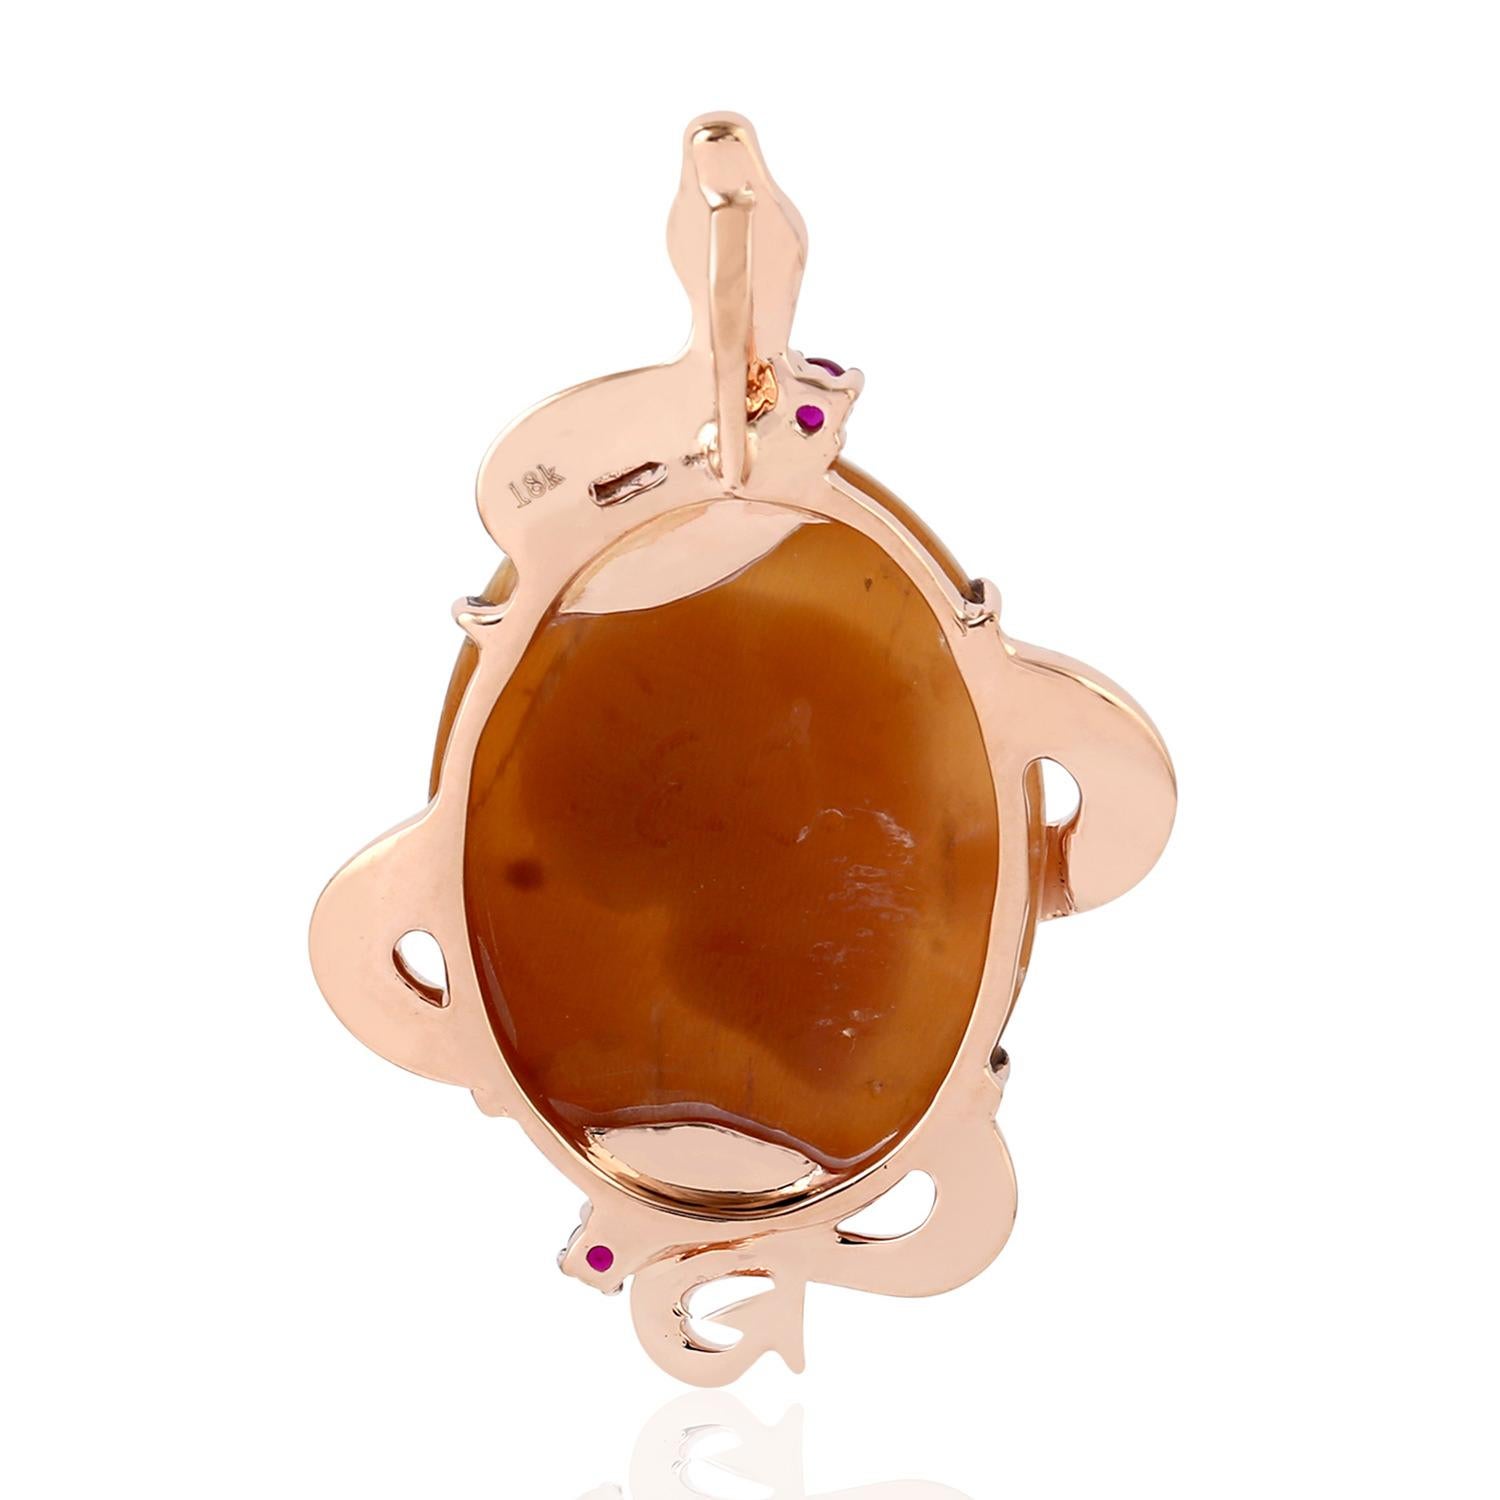 Cast in 18 karat gold. This beautiful cameo pendant necklace is set with 8.63 carats cameo shell, .20 carats ruby and .40 carats of sparkling diamonds. 

FOLLOW  MEGHNA JEWELS storefront to view the latest collection & exclusive pieces.  Meghna